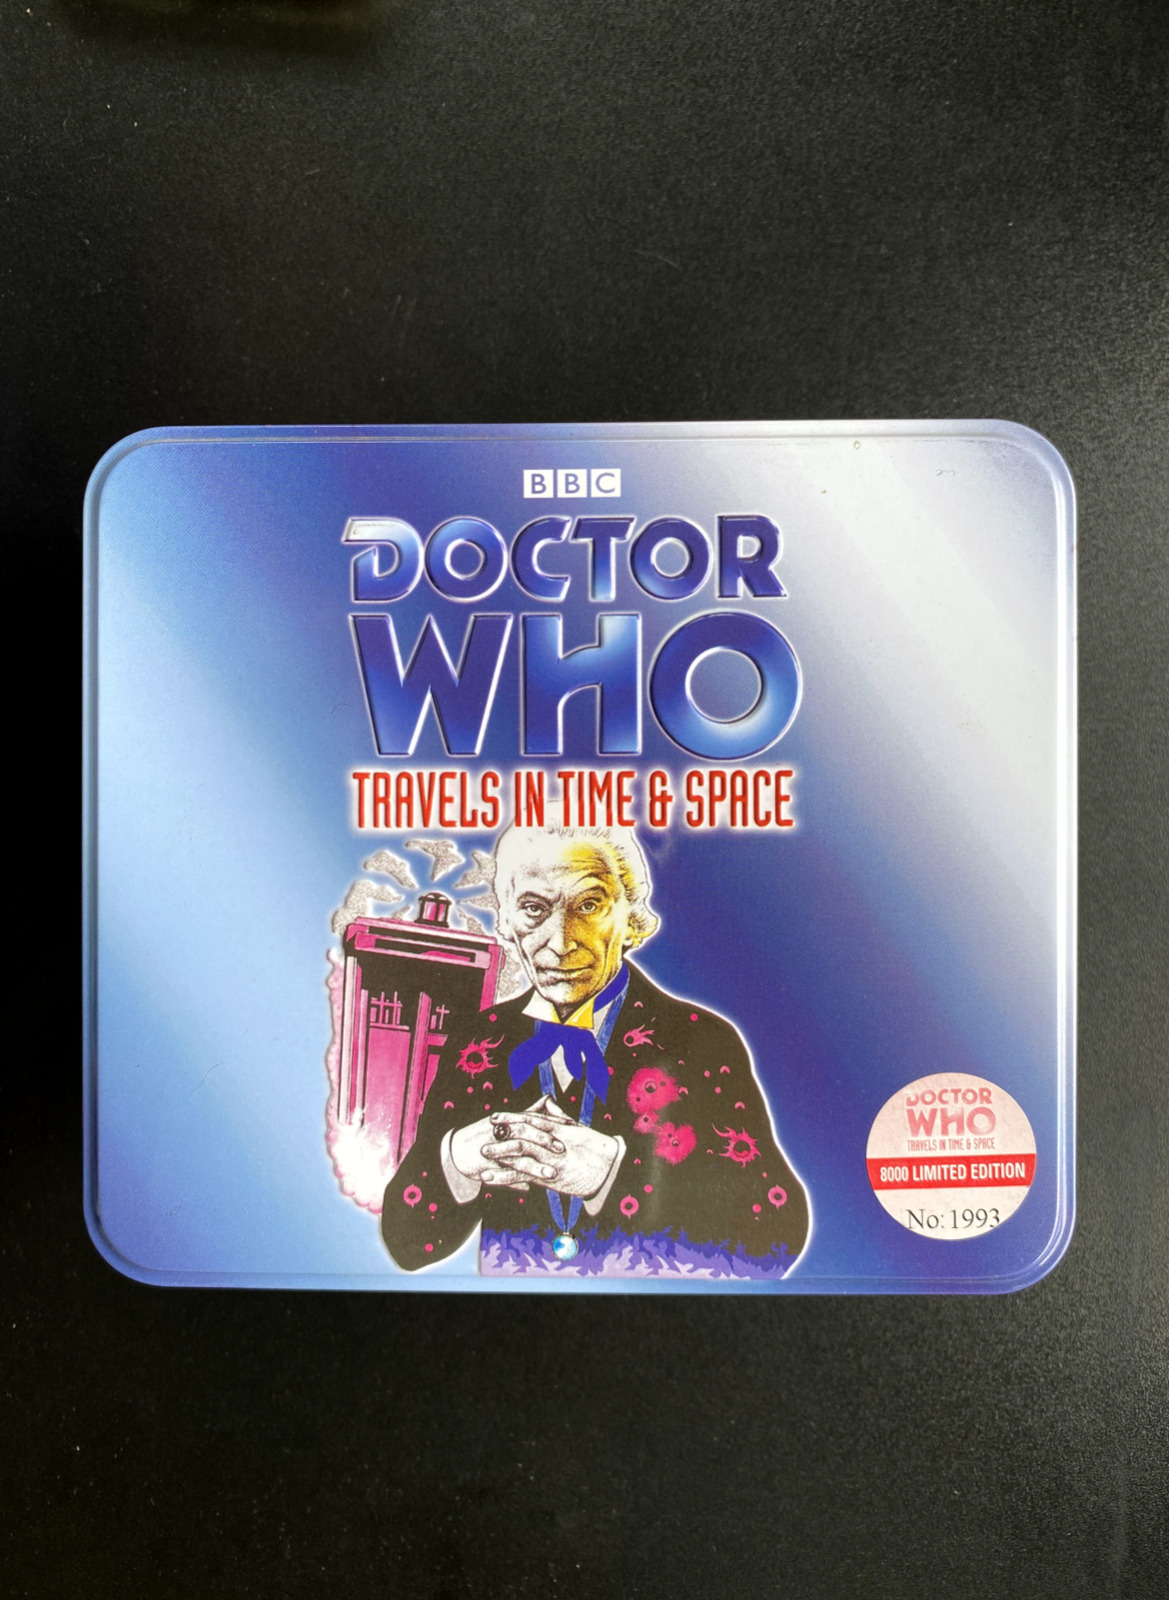 Doctor Who: Travels in Time and Space LIMITED EDITION CD TIN SET # 1993 BBC